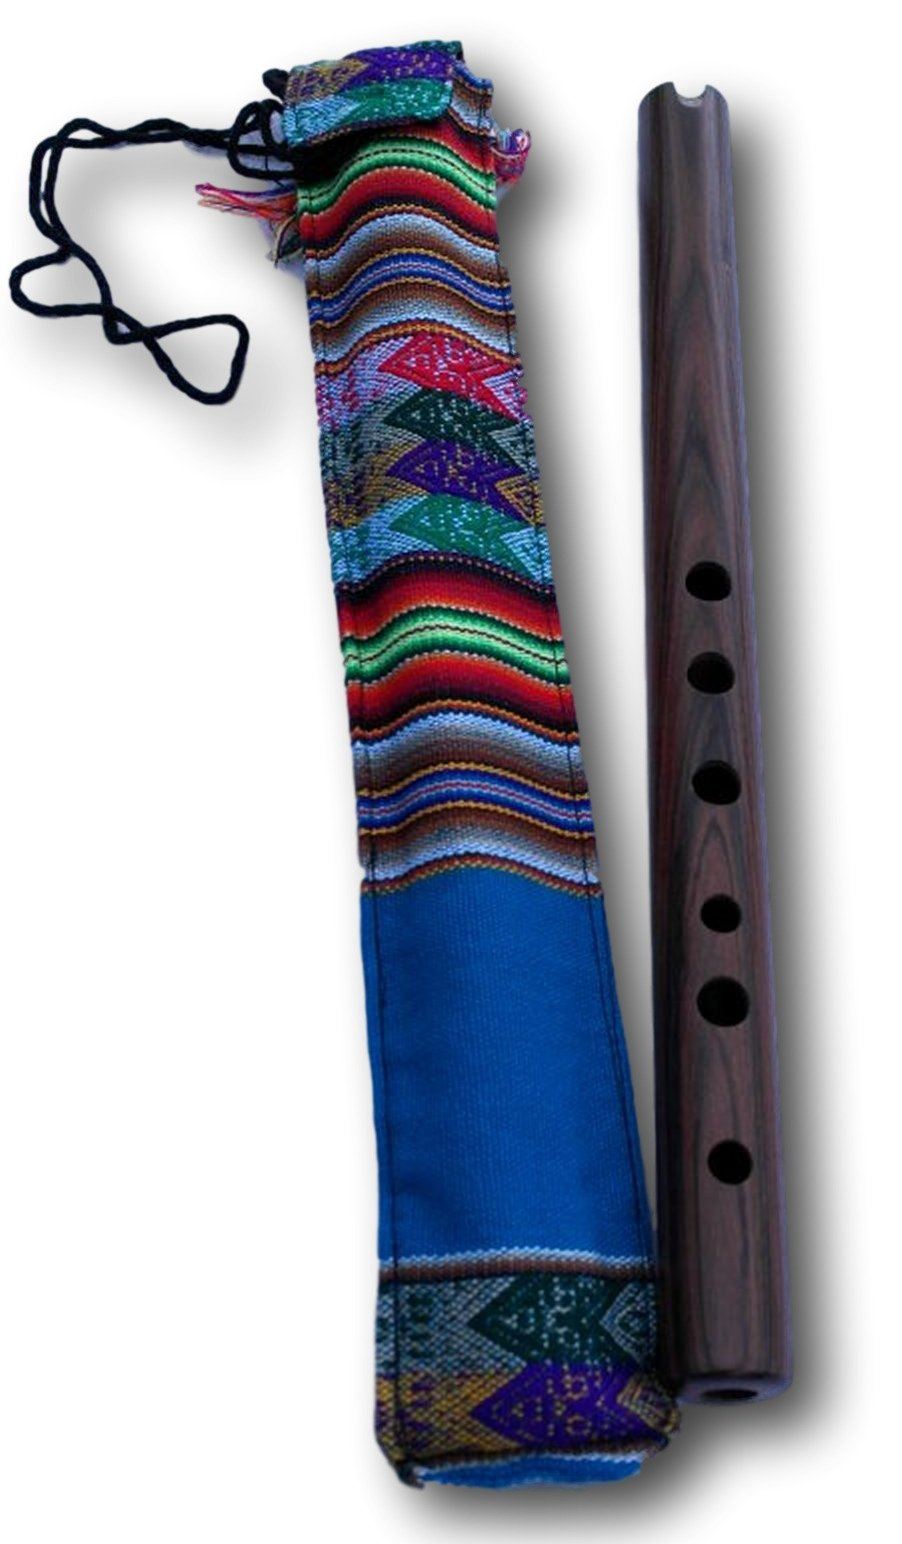 Wooden Andean Quena Jacaranda flute with a decorated protective carry bag